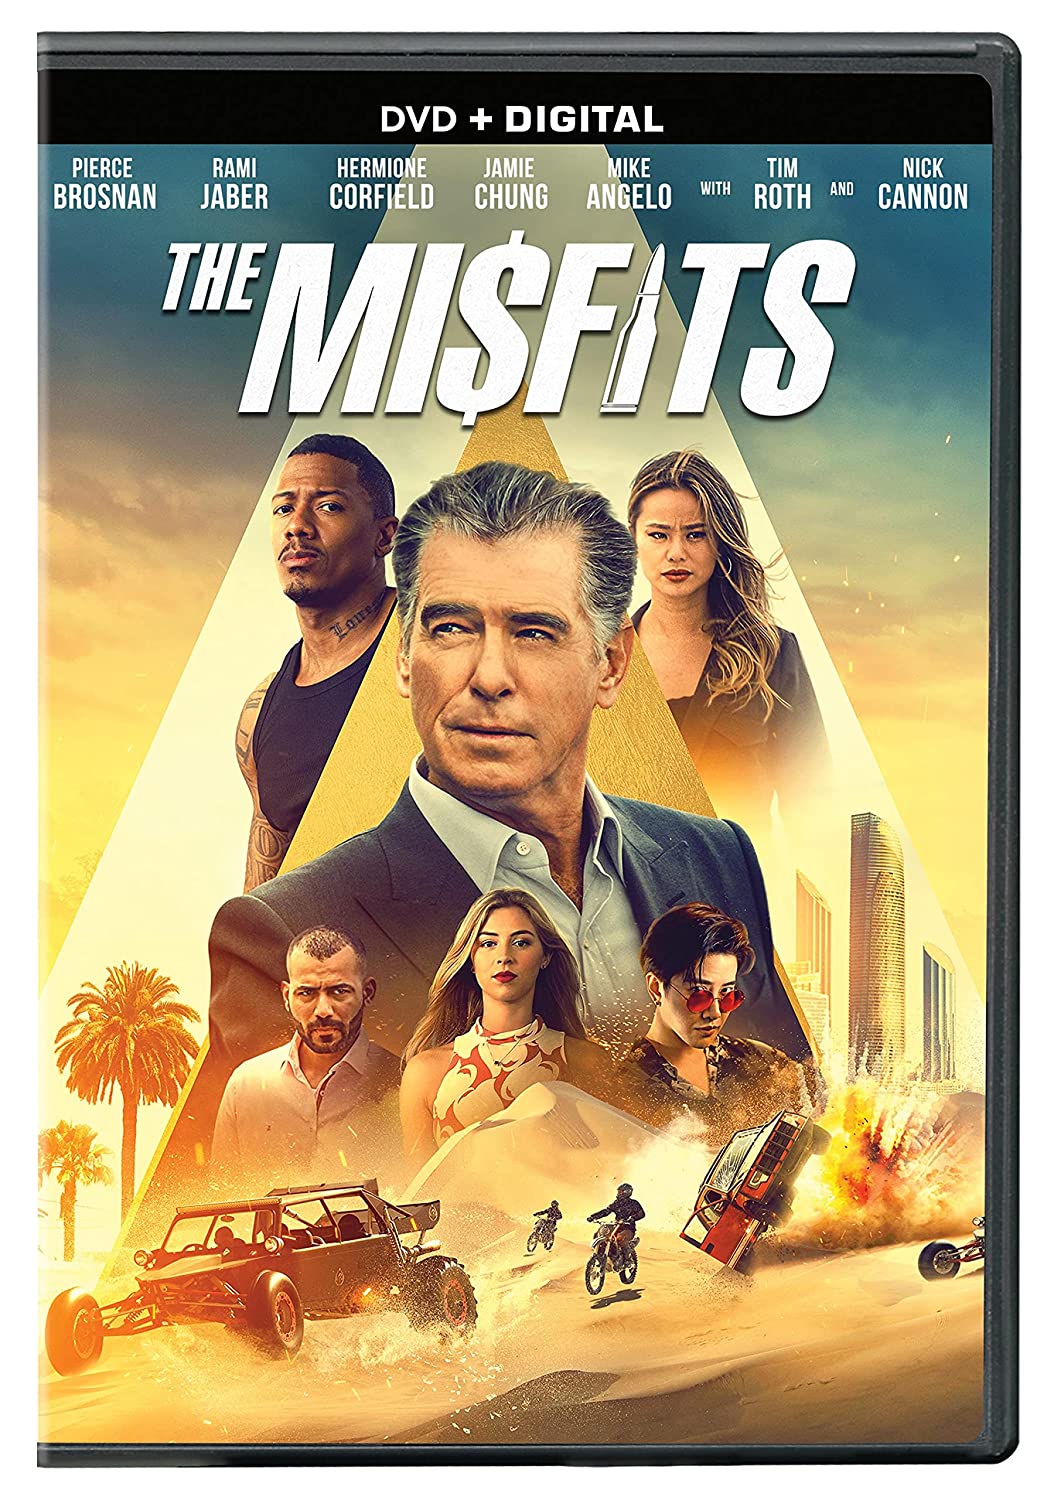 Image for "The Misfits"